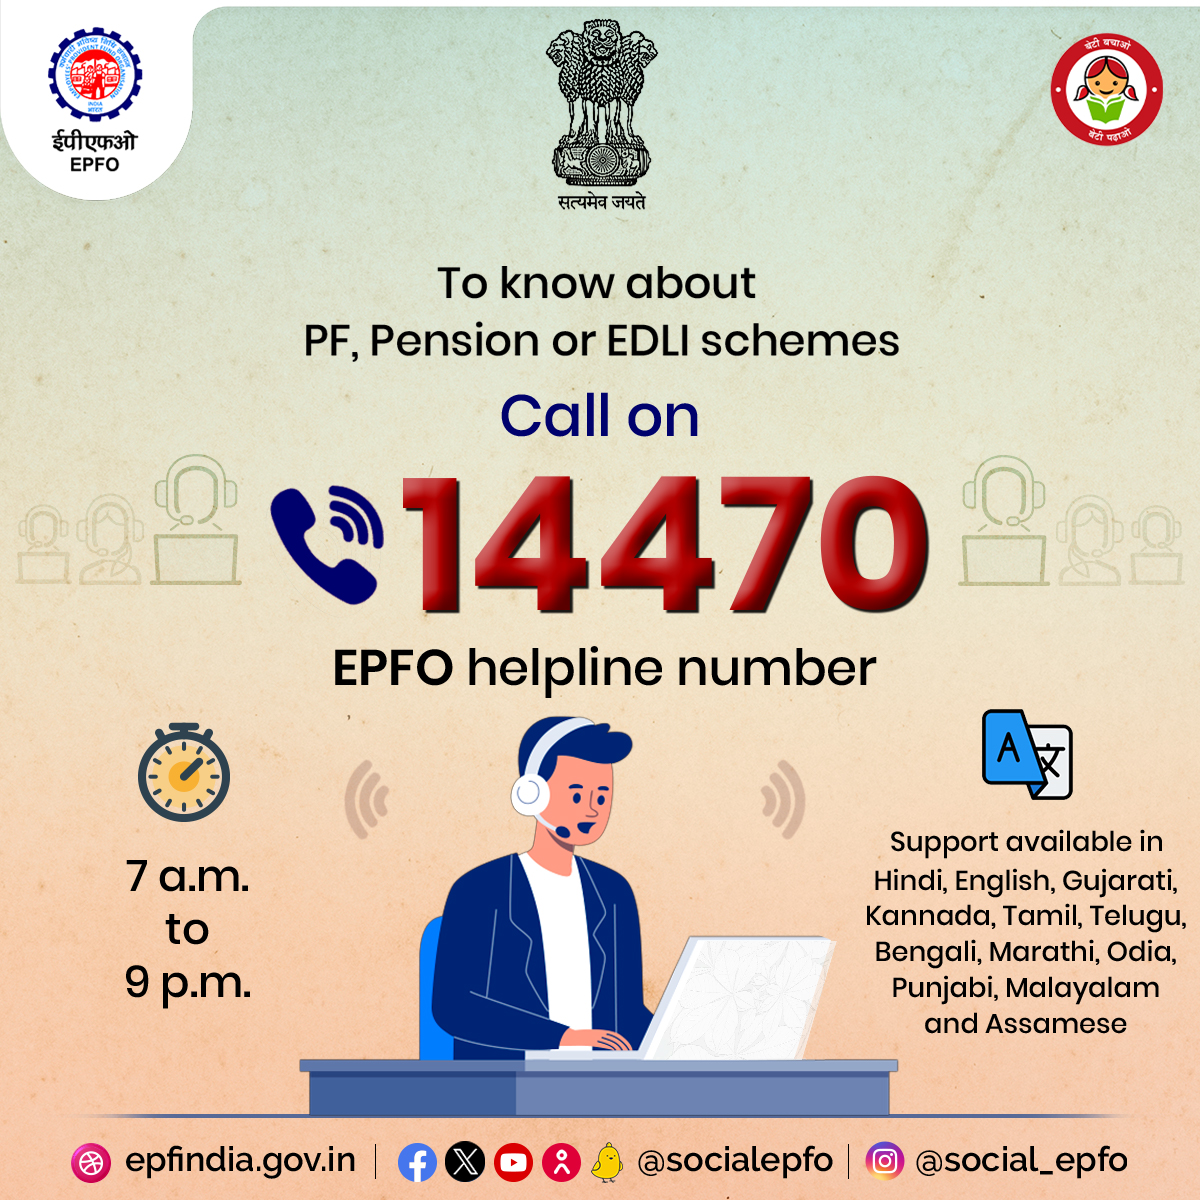 EPFO's Call Centre answers queries on EPF, Pension and EDLI in 12 Languages. Call #14470

#EPFOhelpline #EPFOservices #EPFOwithYou #HumHaiNa #EPFO #EPF #ईपीएफओ #ईपीएफ